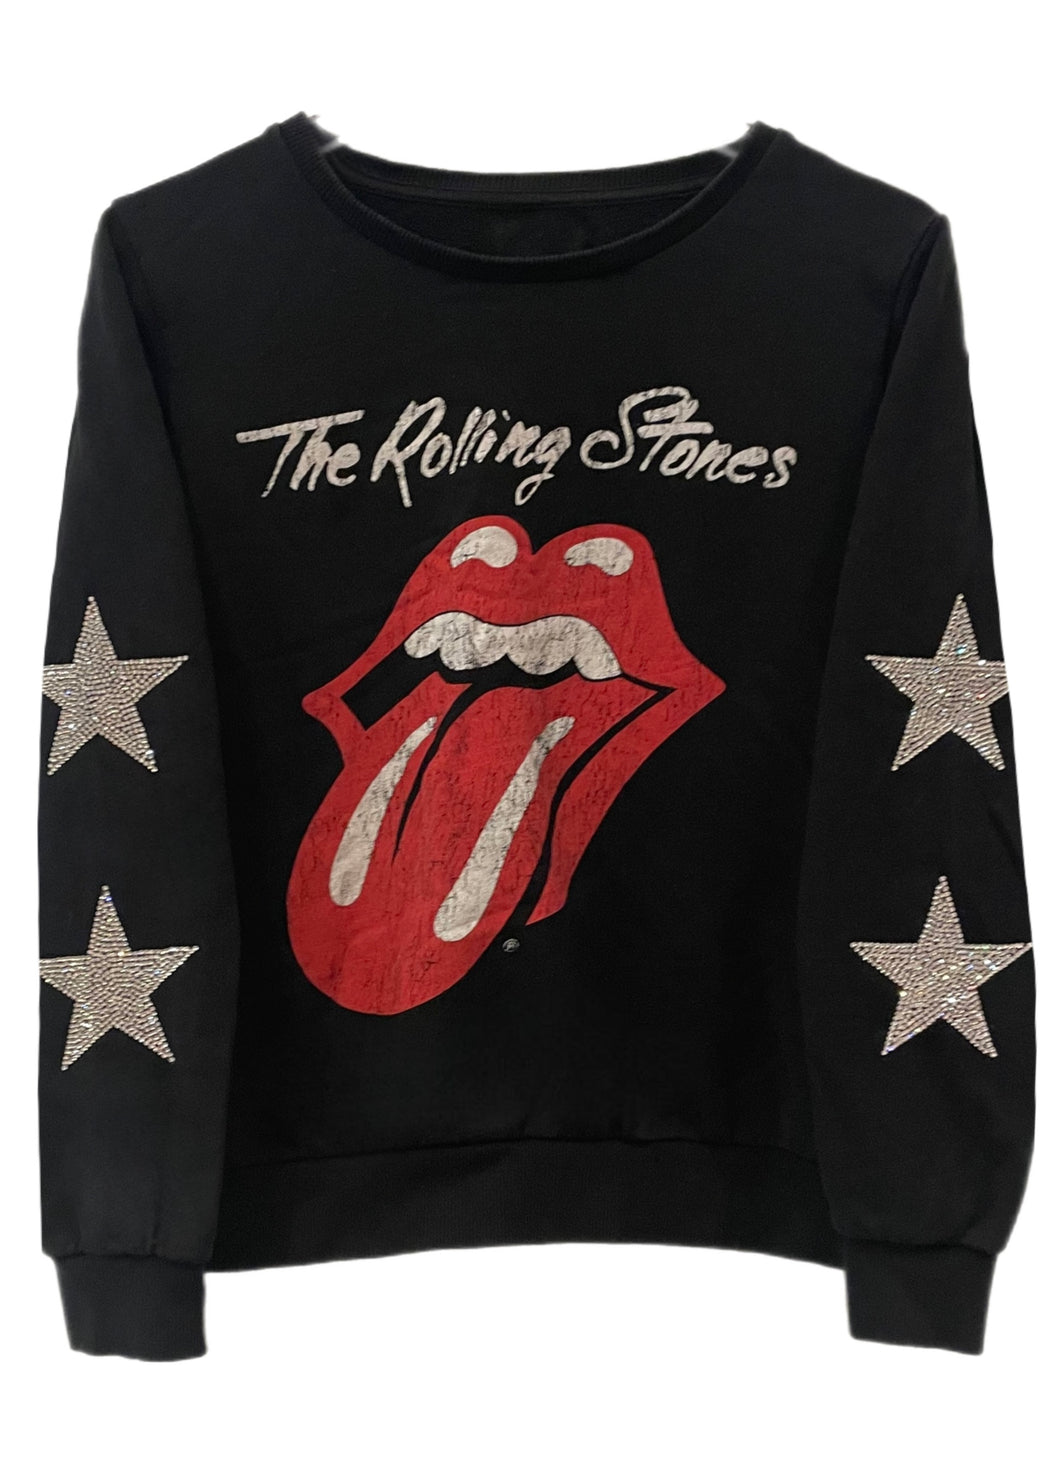 The Rolling Stones, One of a KIND Vintage Sweatshirt with Crystal Star Design